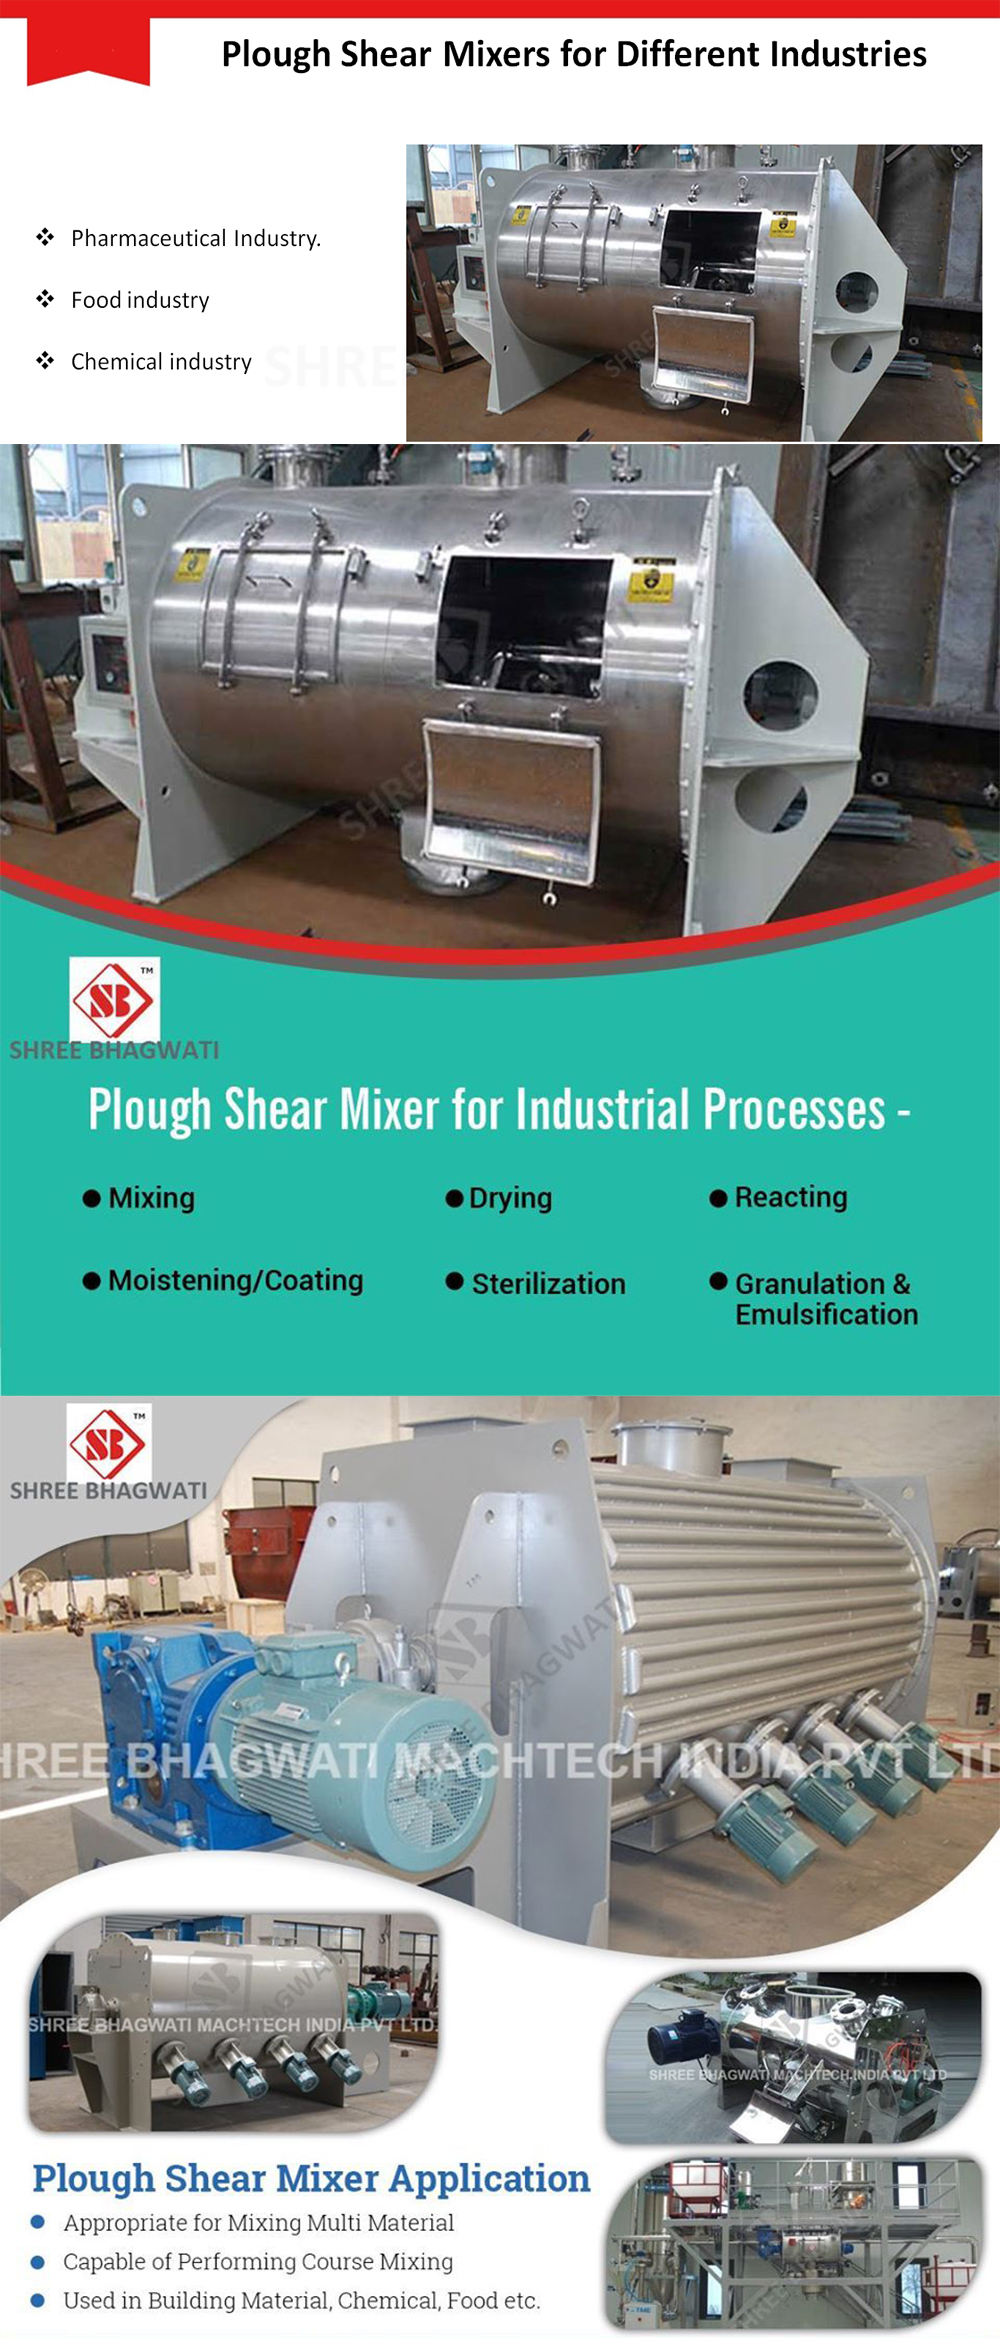 Plough Shear Mixers for Different Industries